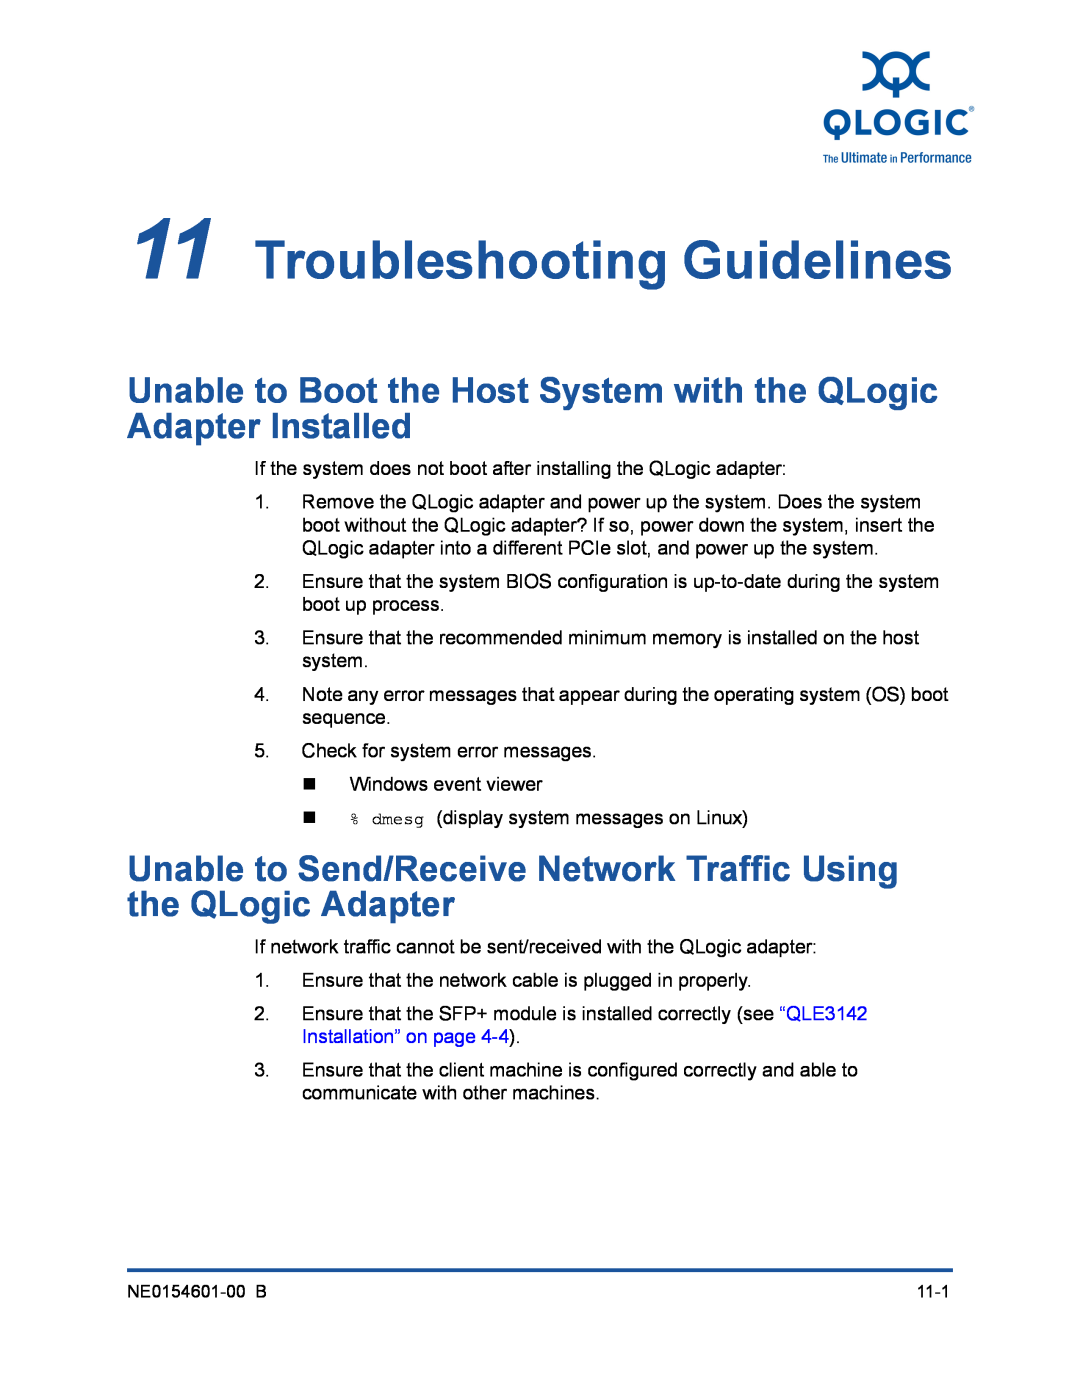 Q-Logic 3000, 3100 manual Troubleshooting Guidelines, Unable to Boot the Host System with the QLogic Adapter Installed 